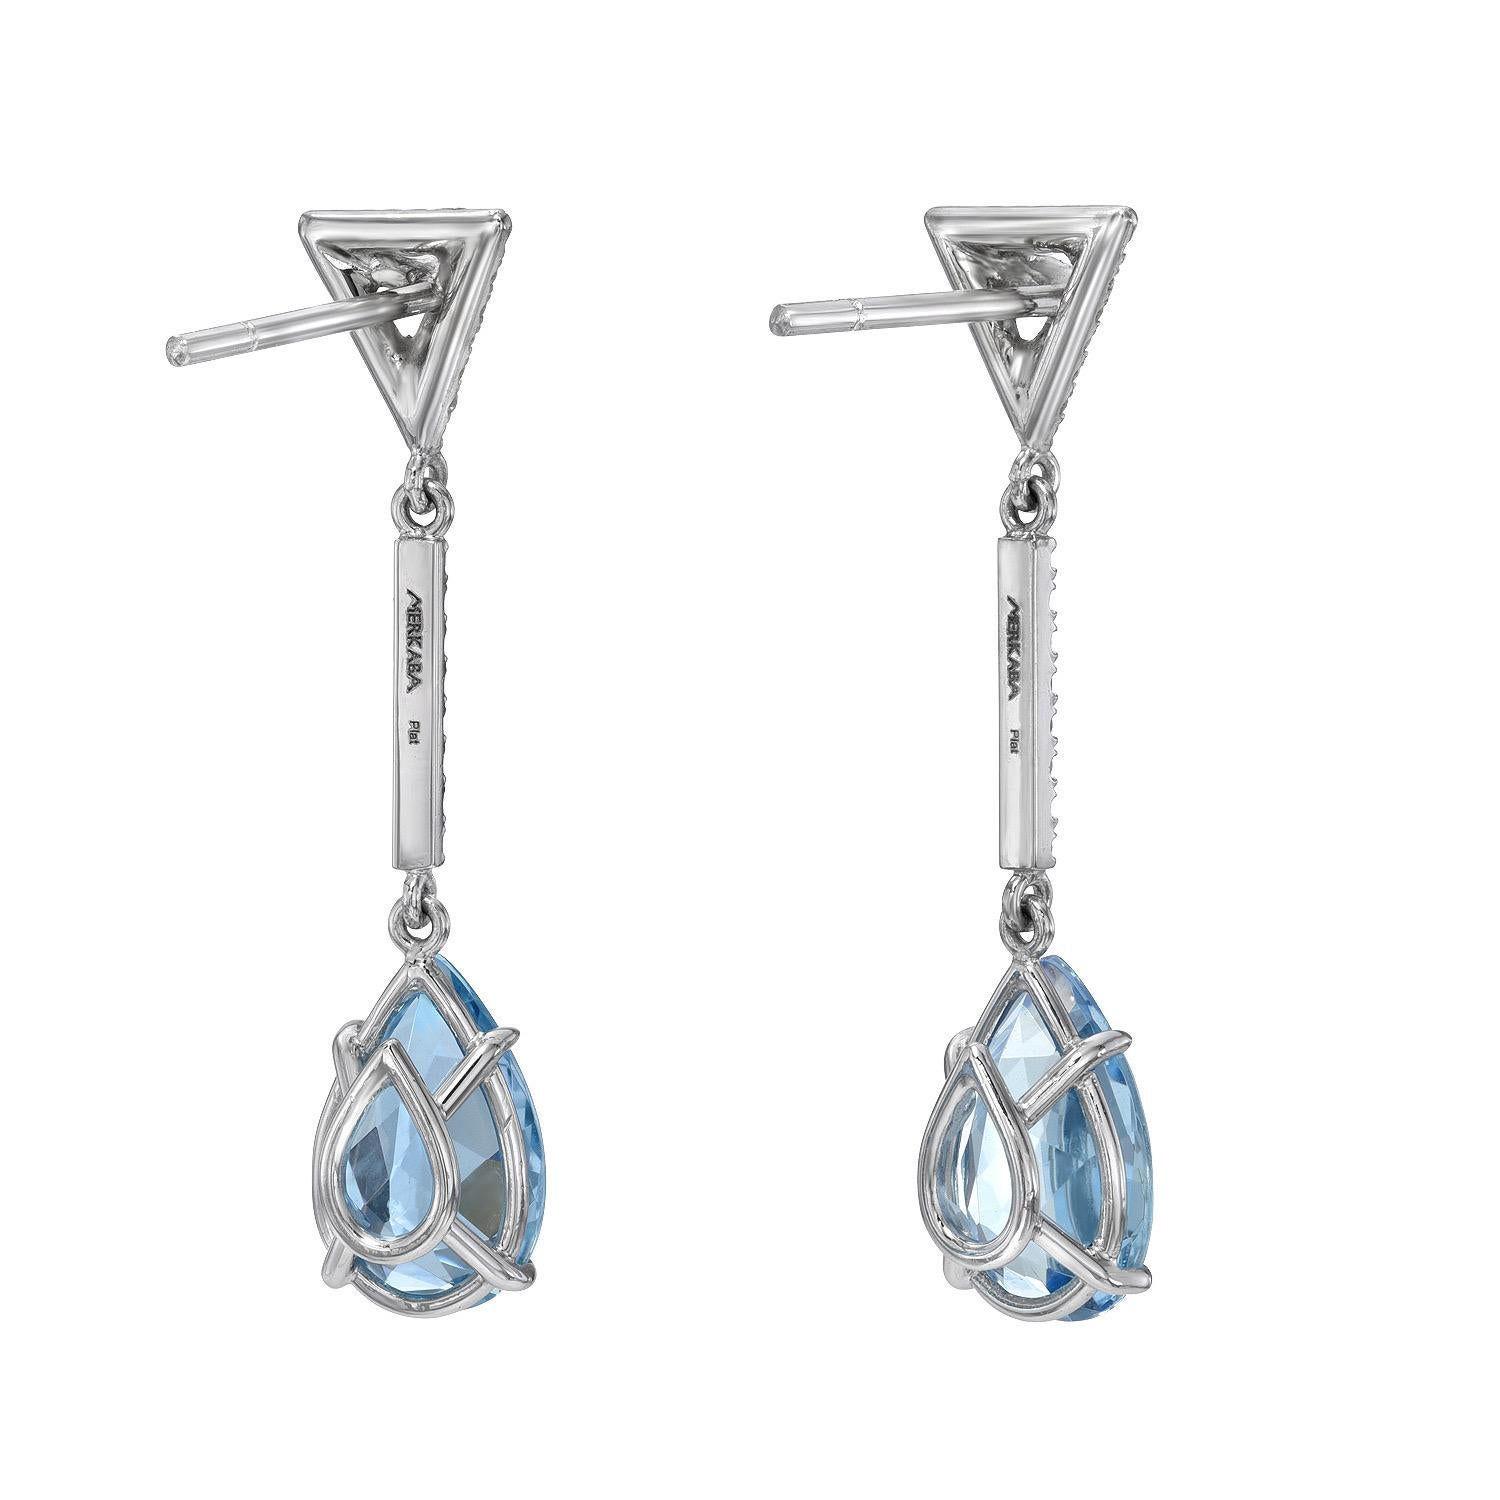 Contemporary Aquamarine Earrings 4.00 Carat Pear Shapes For Sale